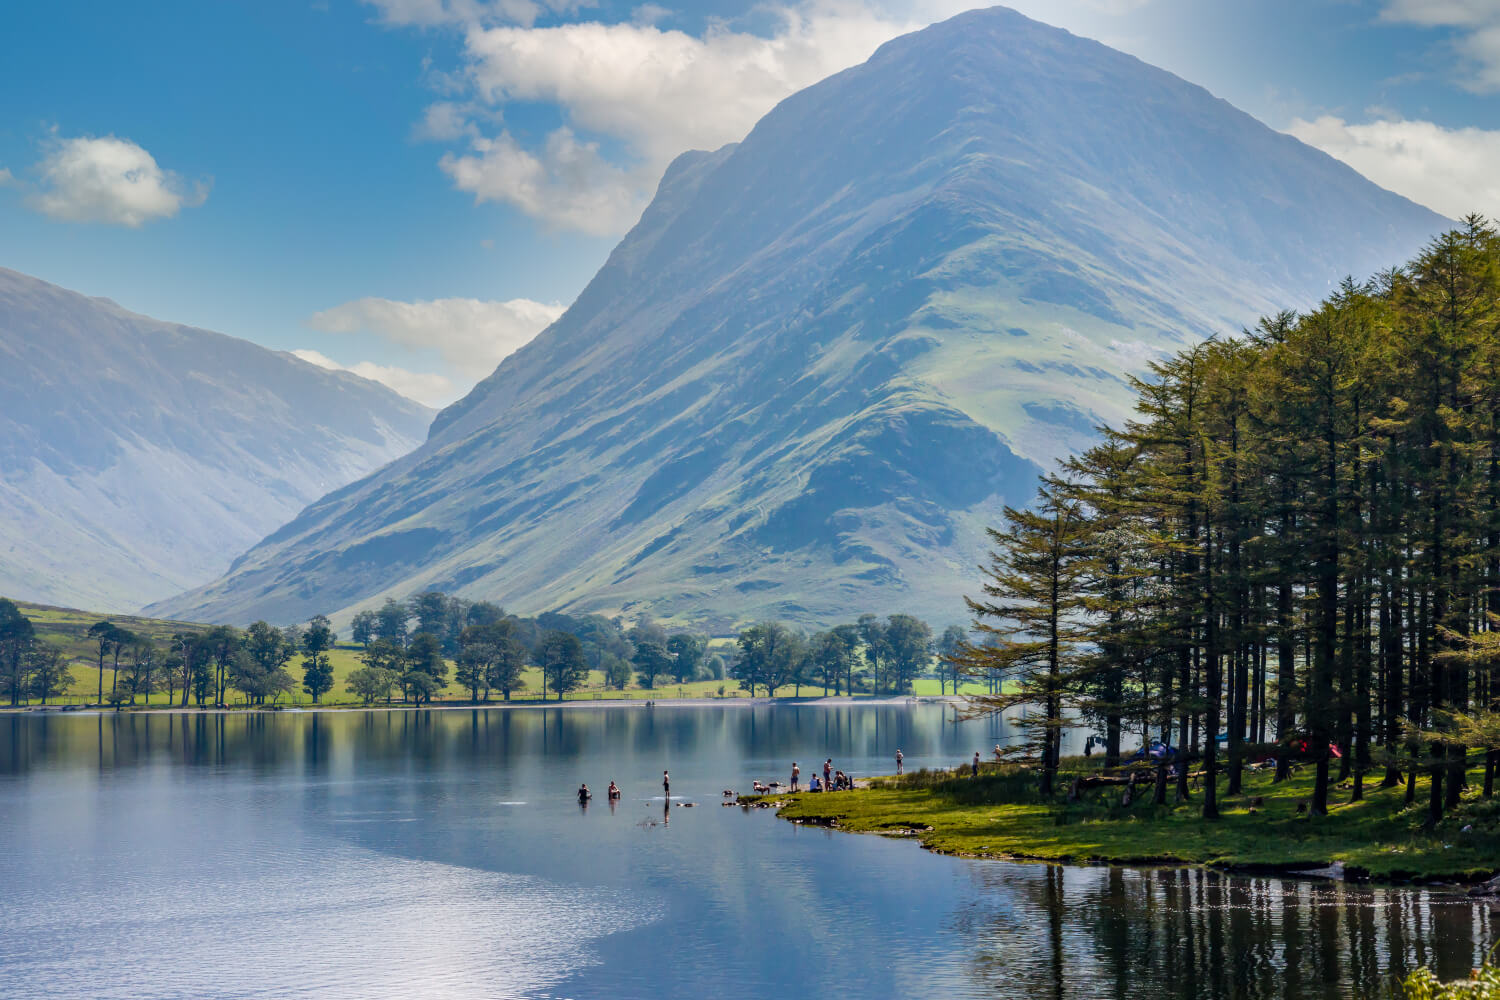 Swimmers enjoying the calm waters of Buttermere, Lake District, England